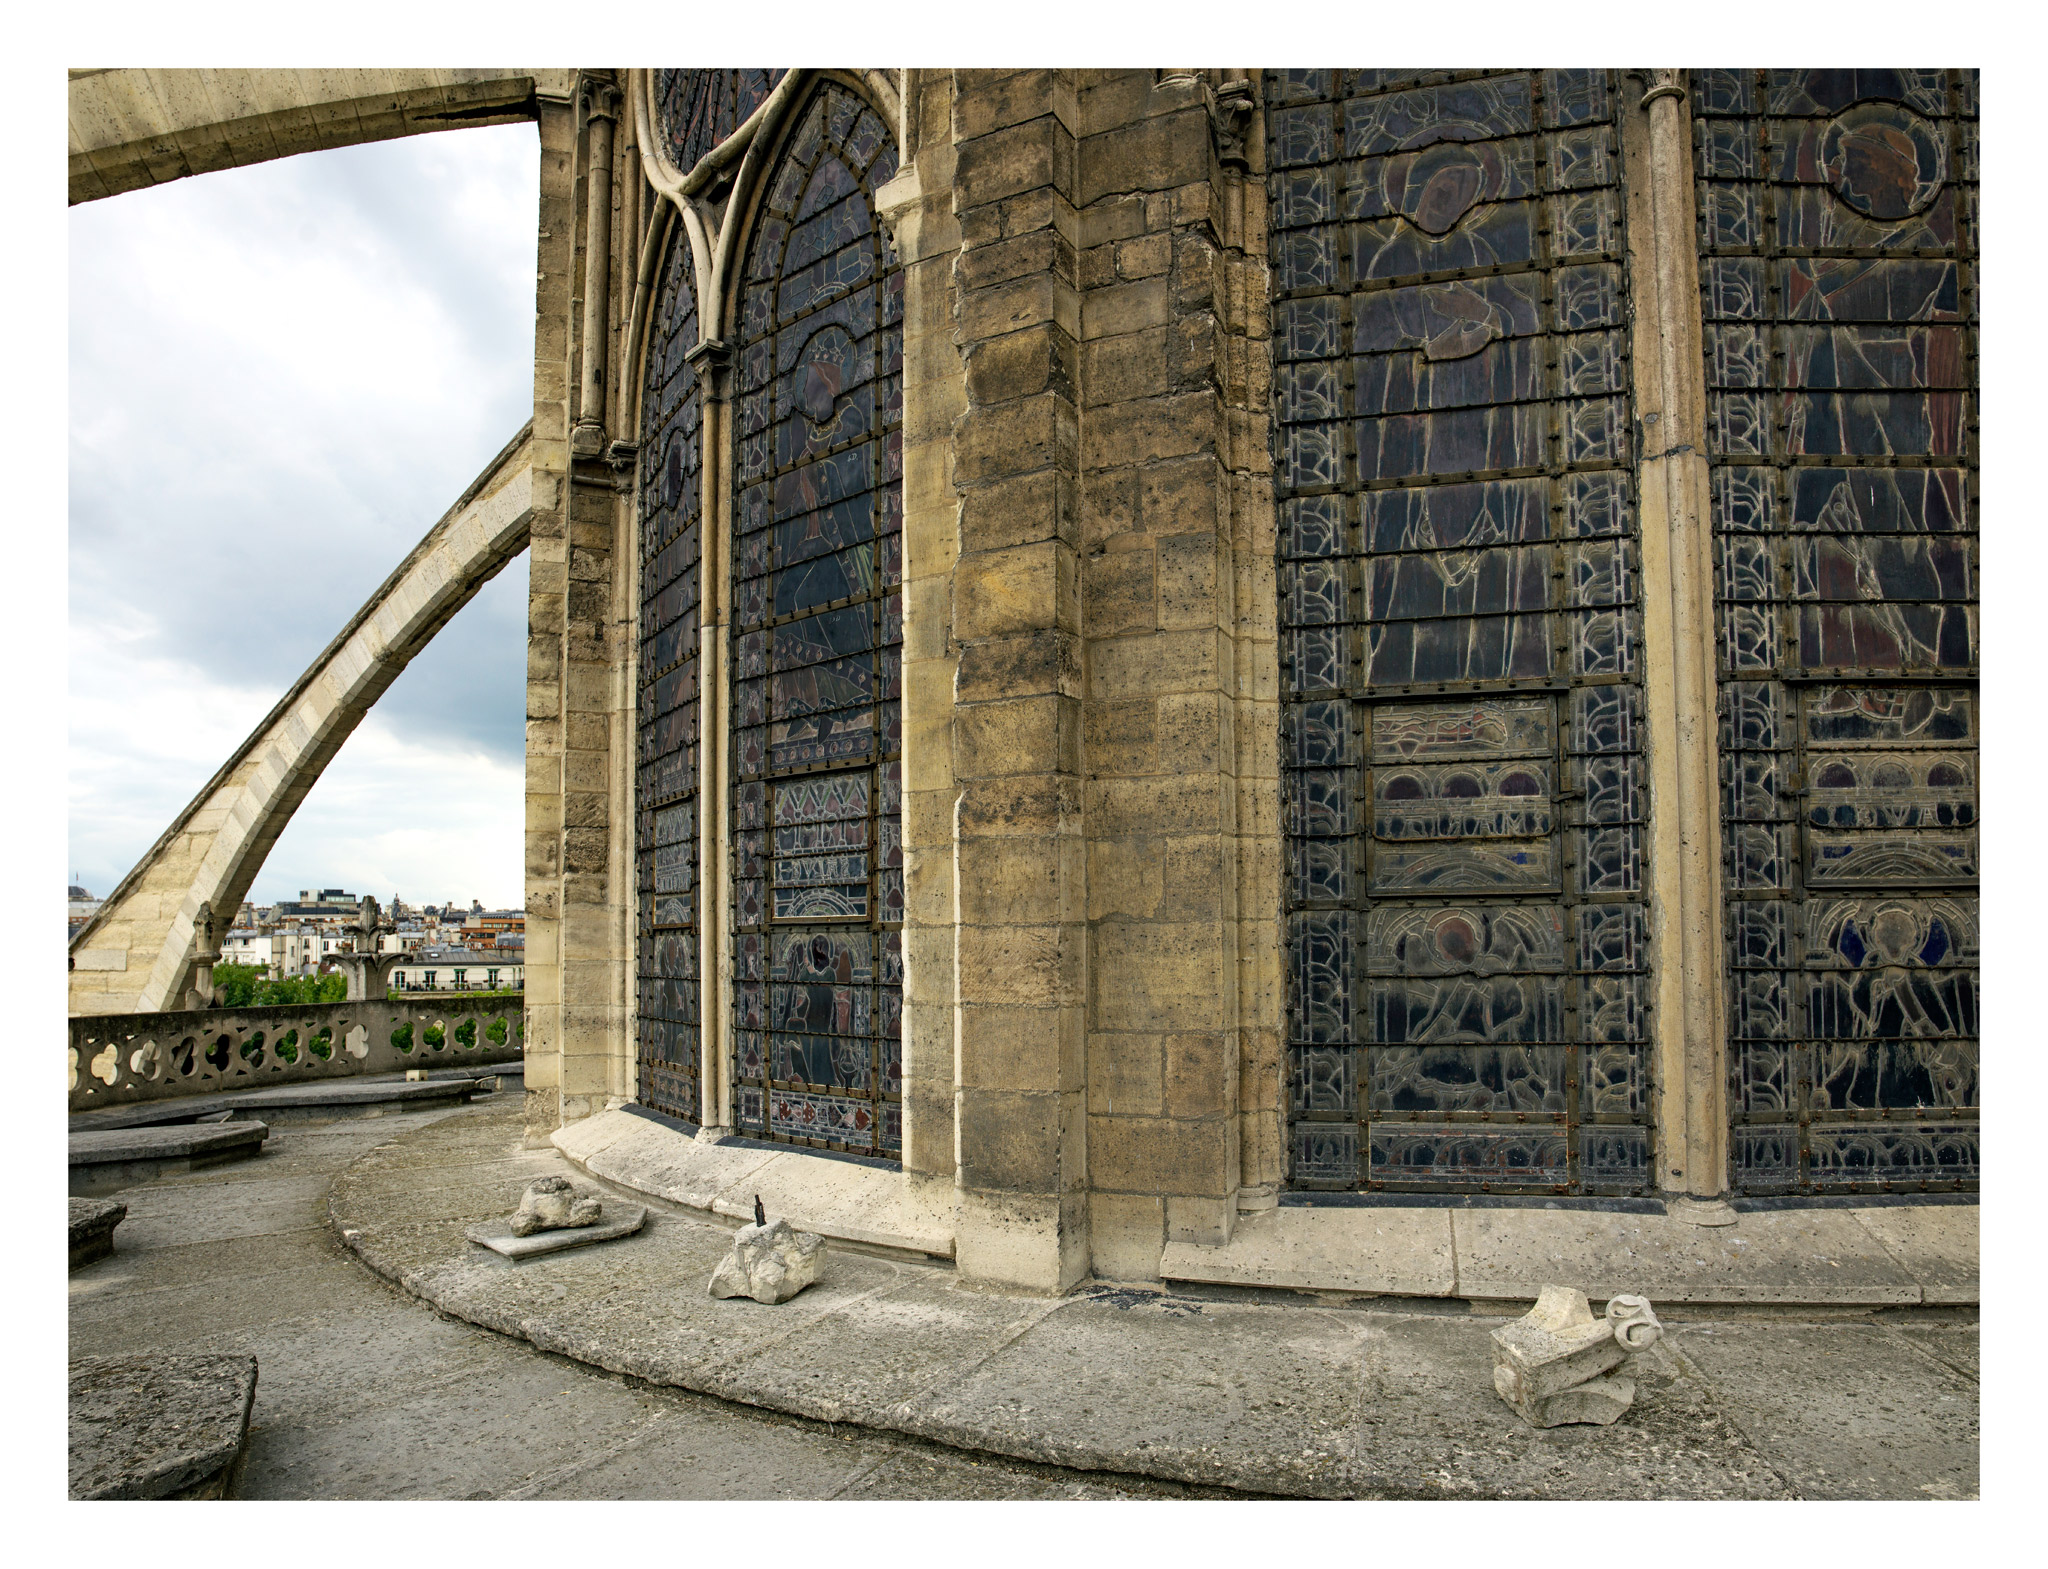 Stonework has fallen from Notre Dame cathedral in Paris. Low-quality stone and cement were used in a restoration in 1844. Nearly 200 years on, that 19th century work is crumbling (though some of the painstaking medieval construction is in better shape). (Vincent Fournier for TIME)